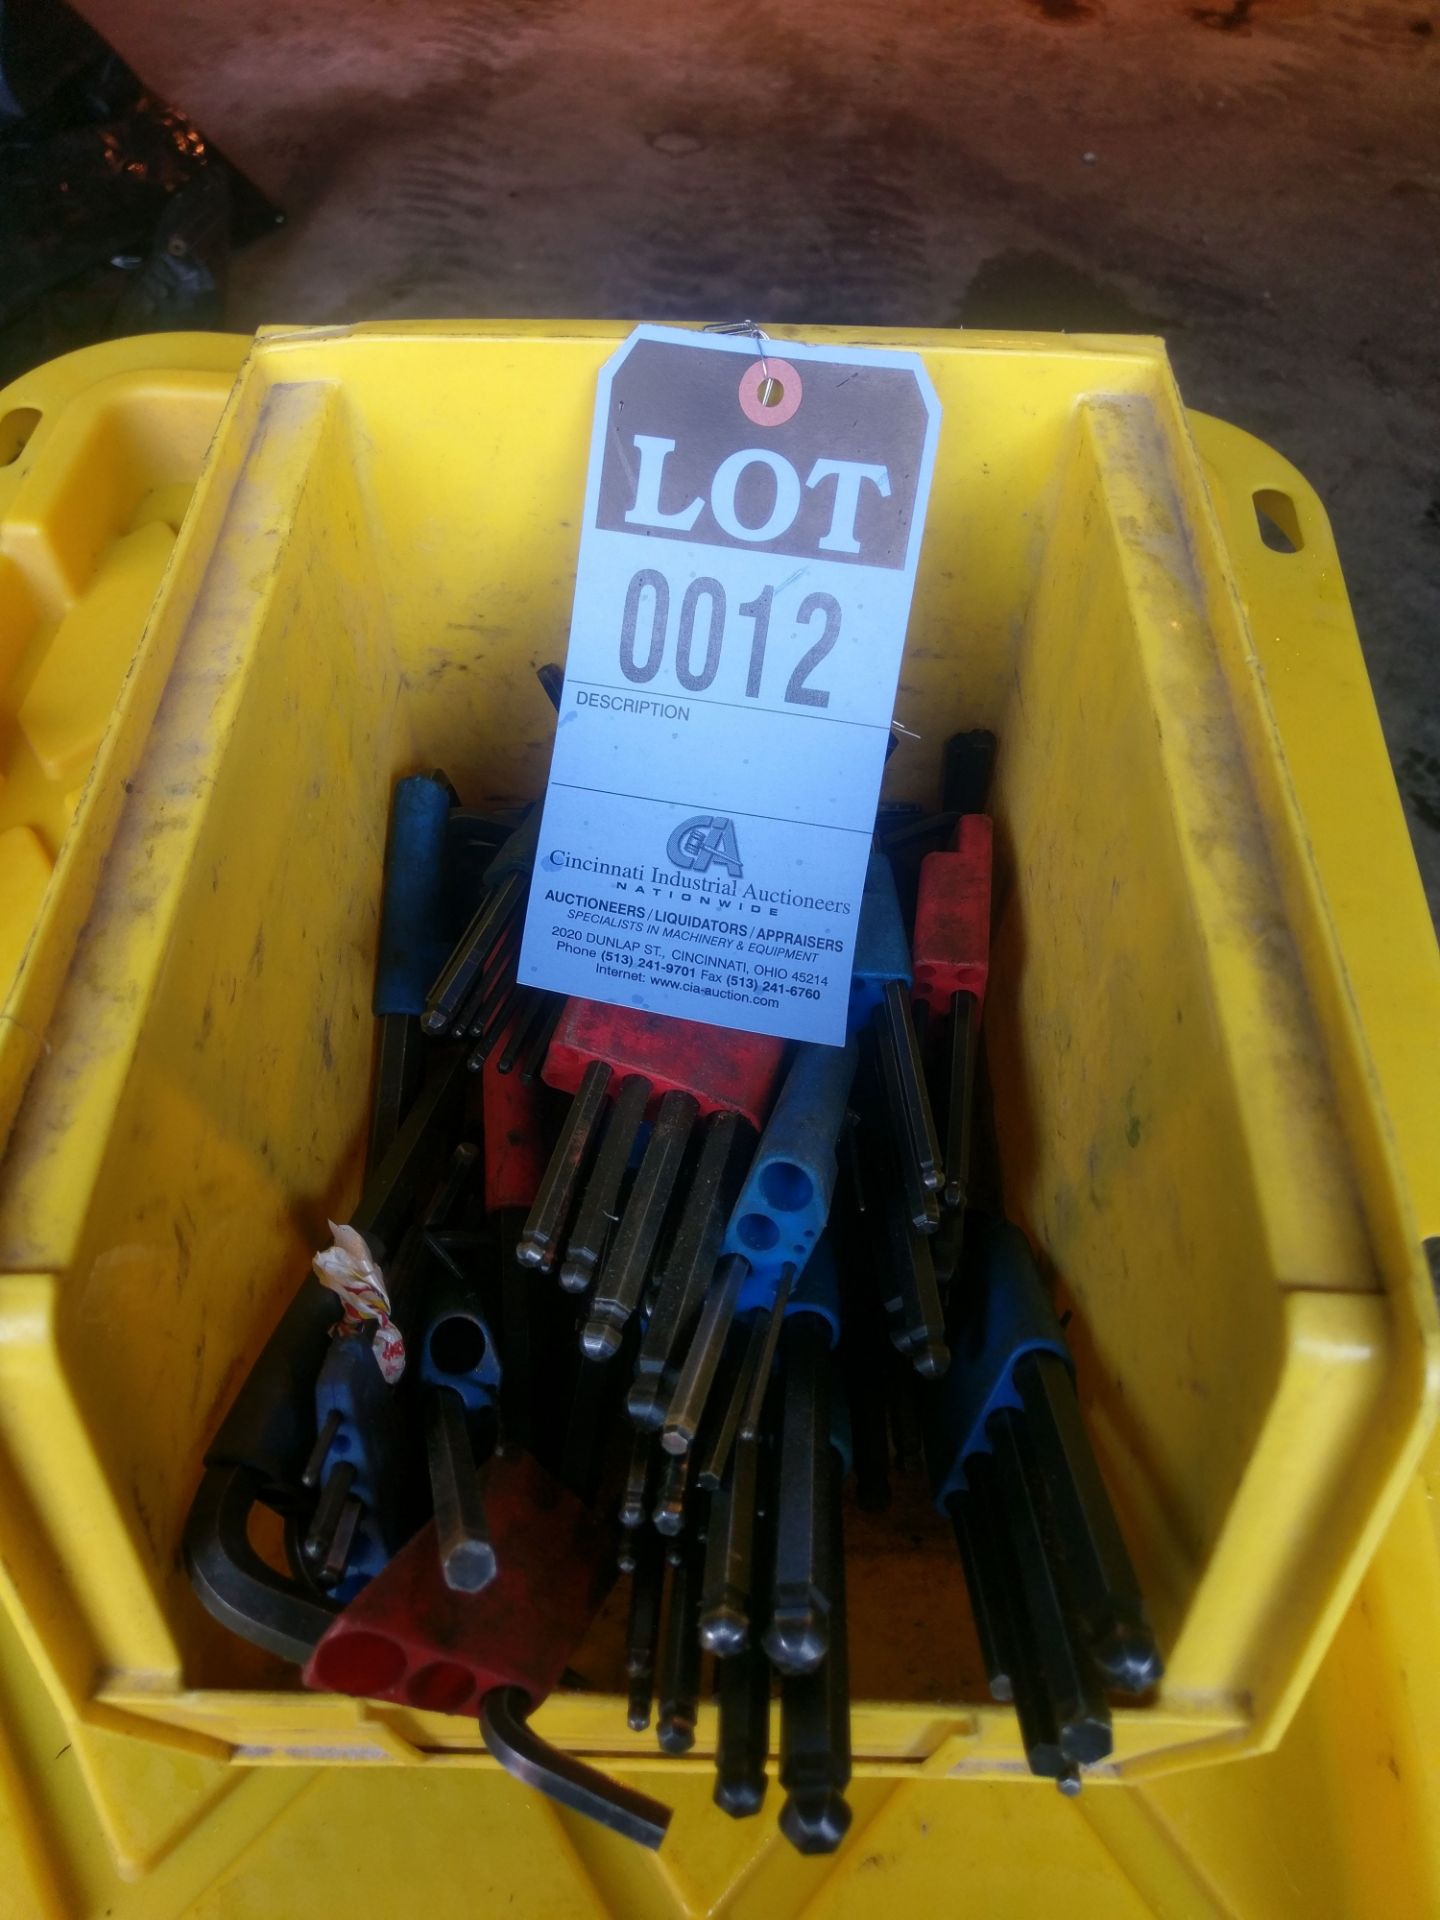 (LOT) ALLEN WRENCHES